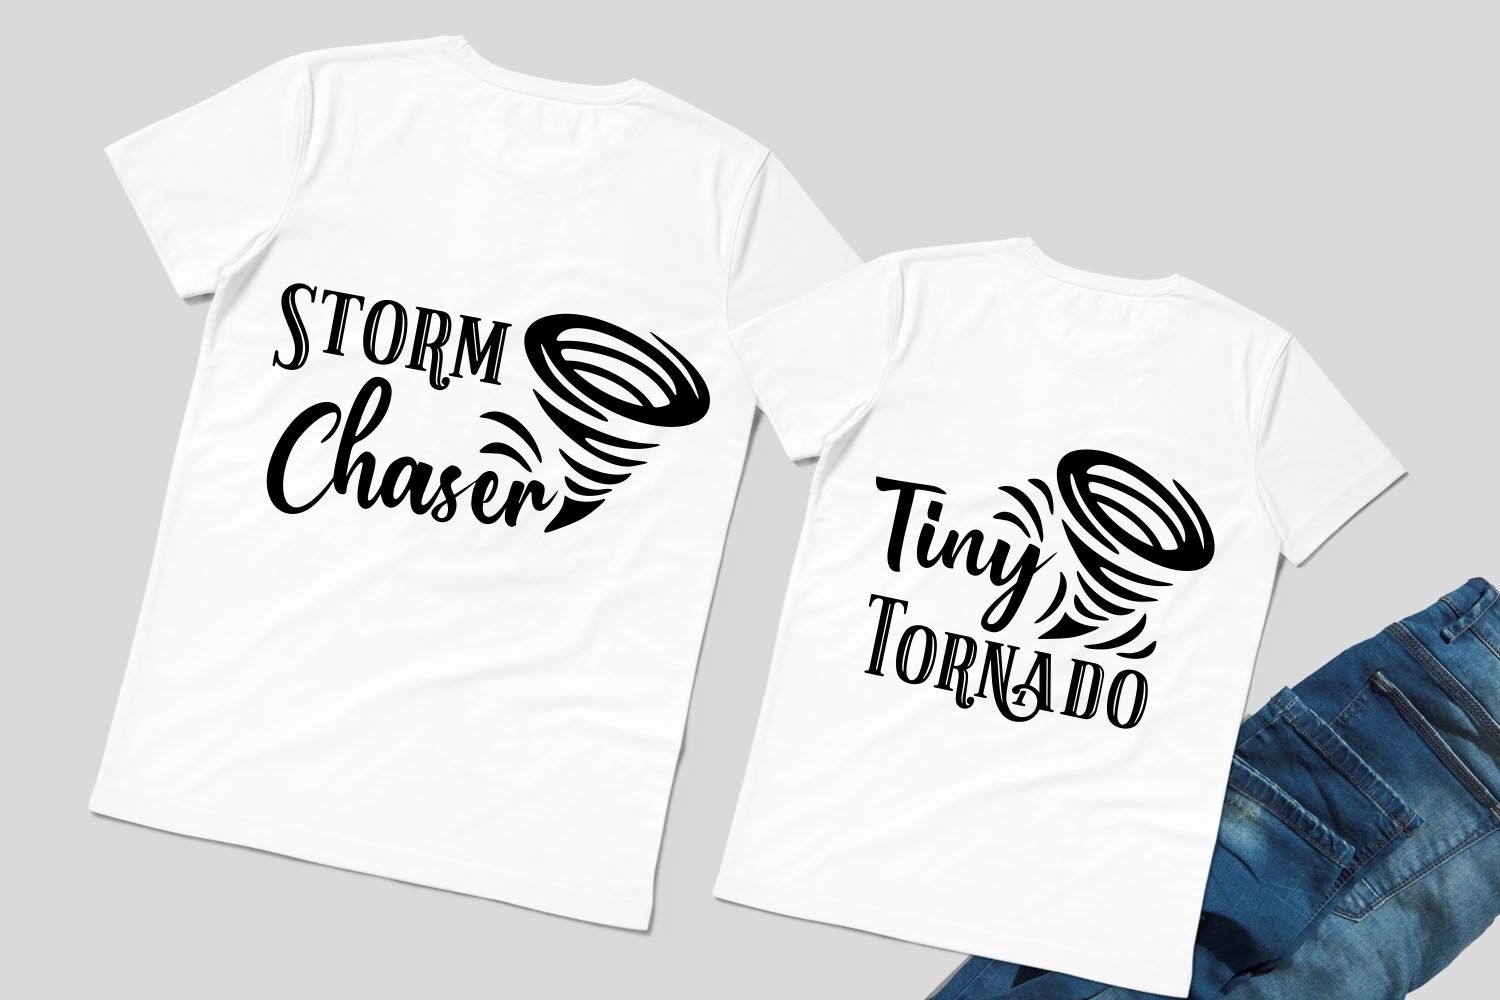 Family Photo Shirt Mommy and Me Shirts Family Shirts Daddy and Me Shirts Tiny Tornado Shirt Matching Family Tee Storm Chaser Shirt